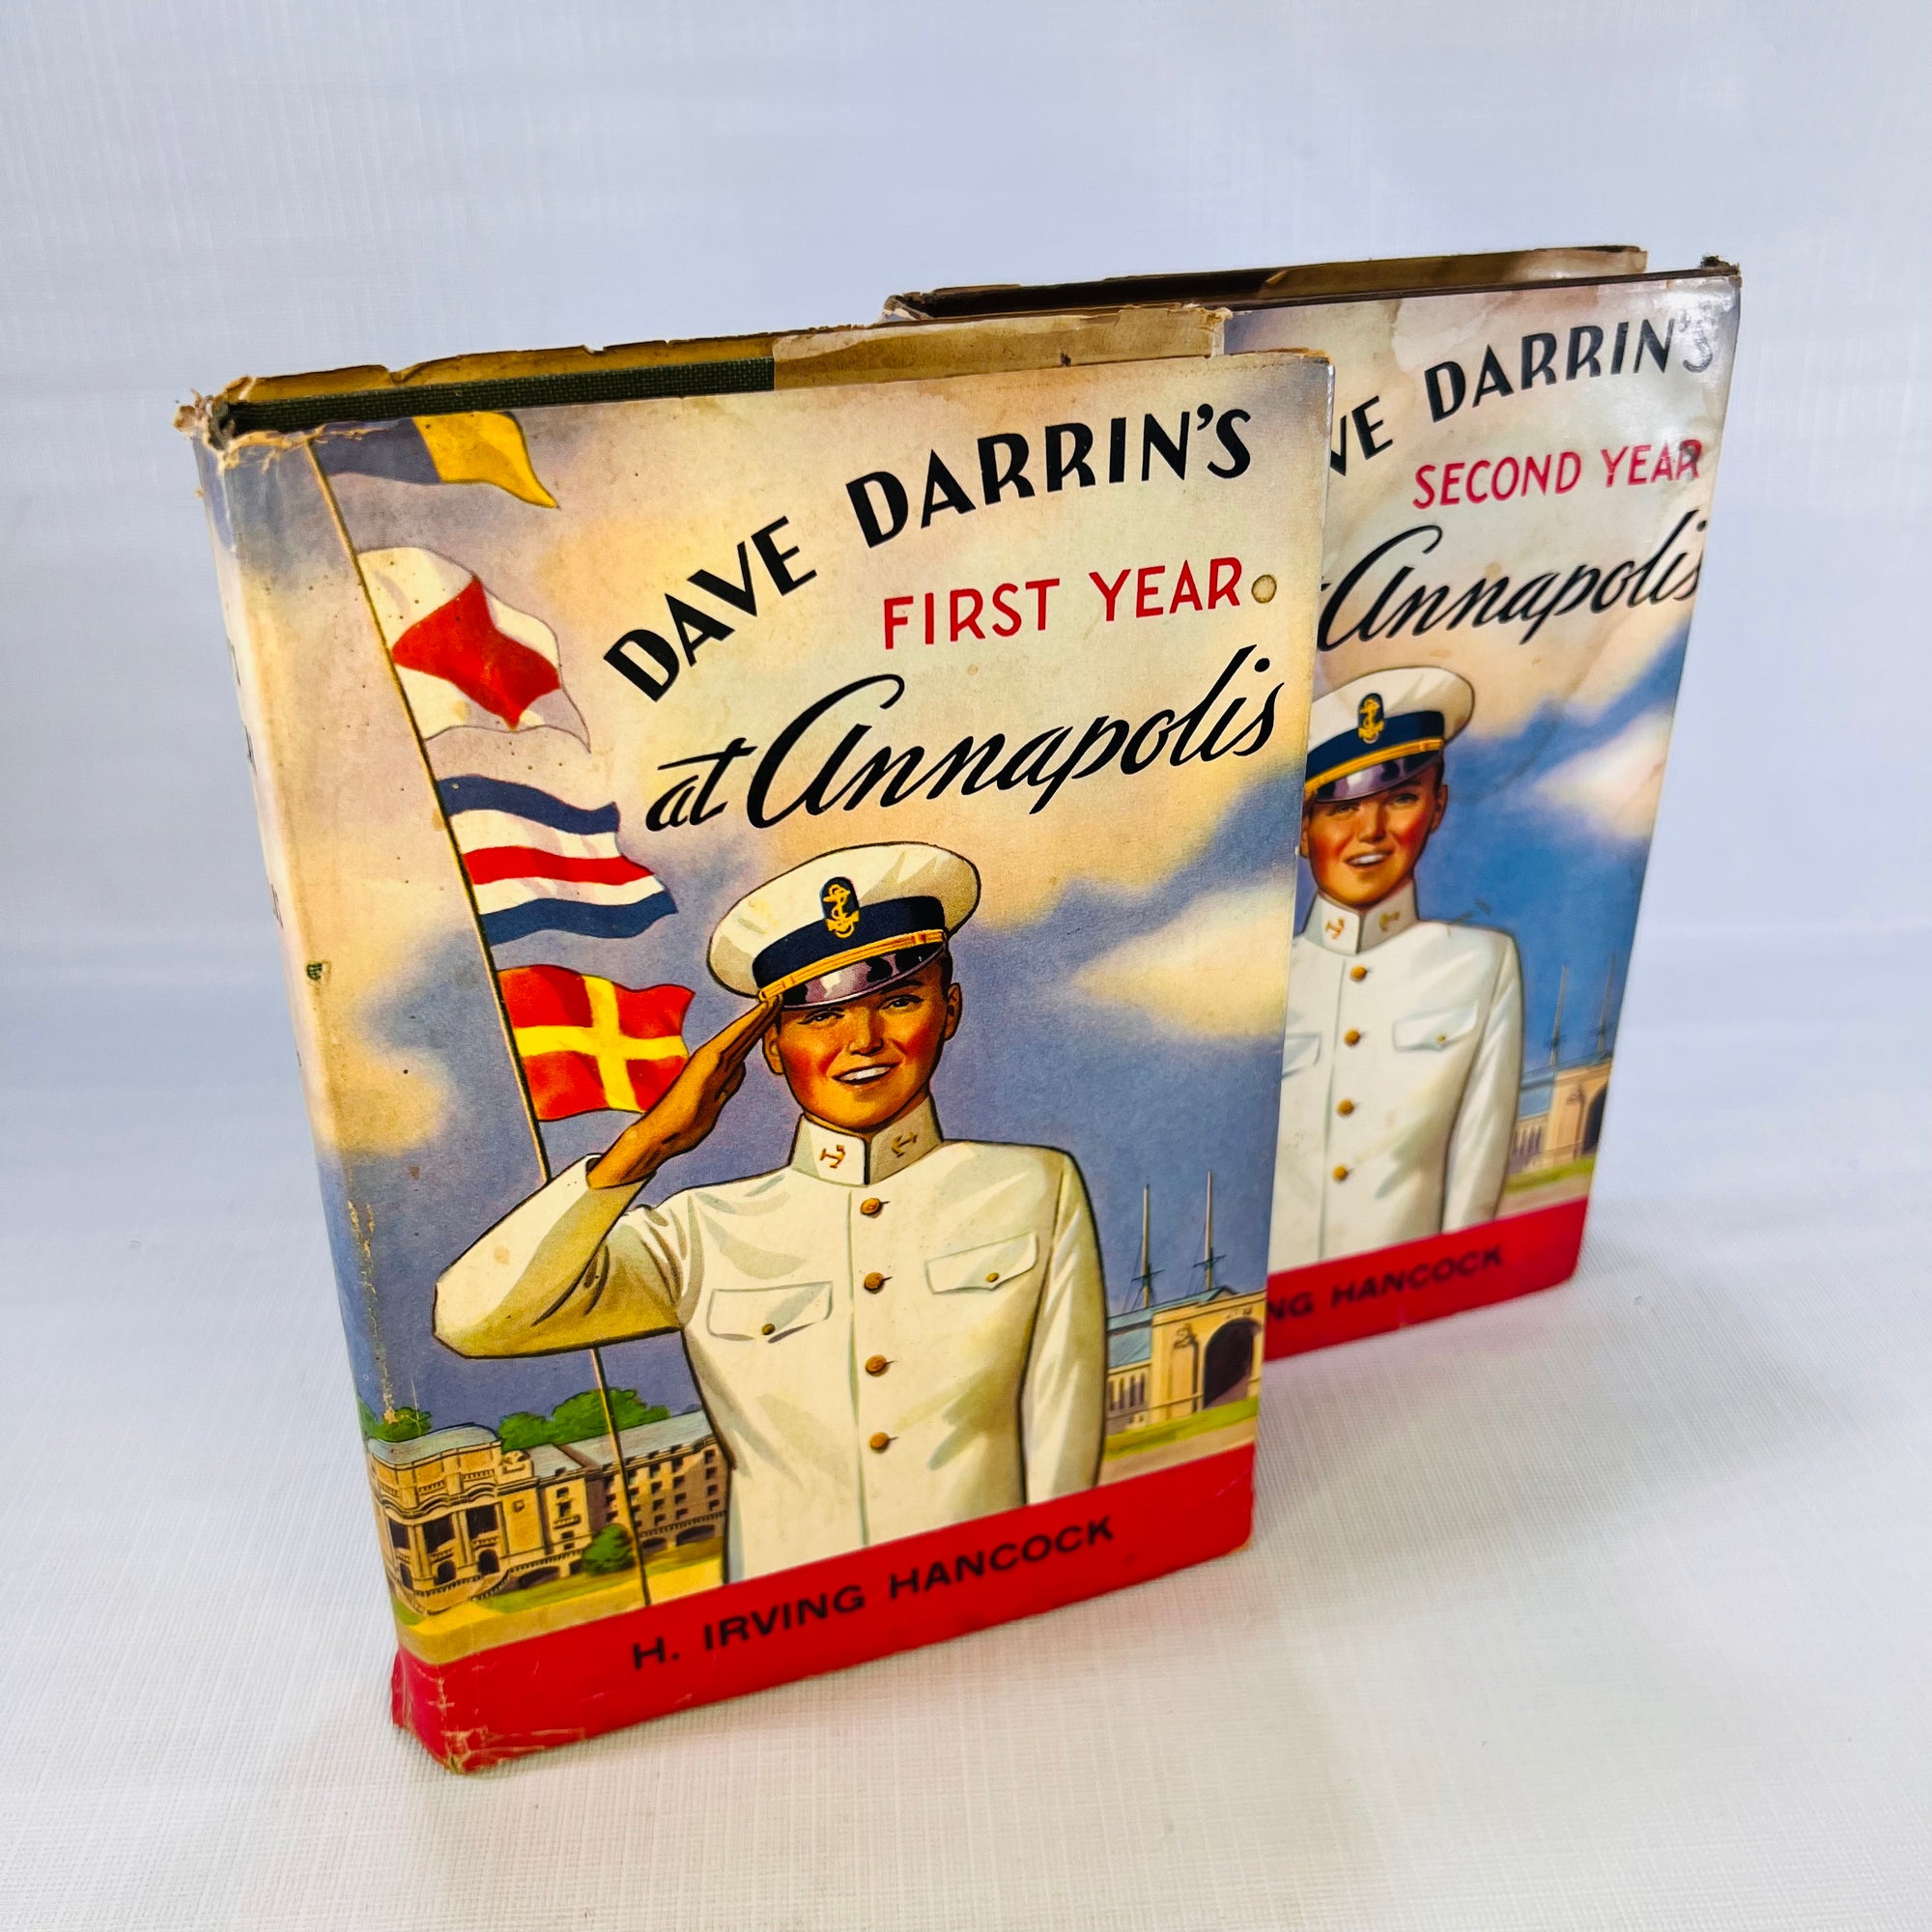 Dave Darrin's First (1910) & Second (1911) Year at Annapolis by H. Irving Hancock The Saalfield Publishing Company